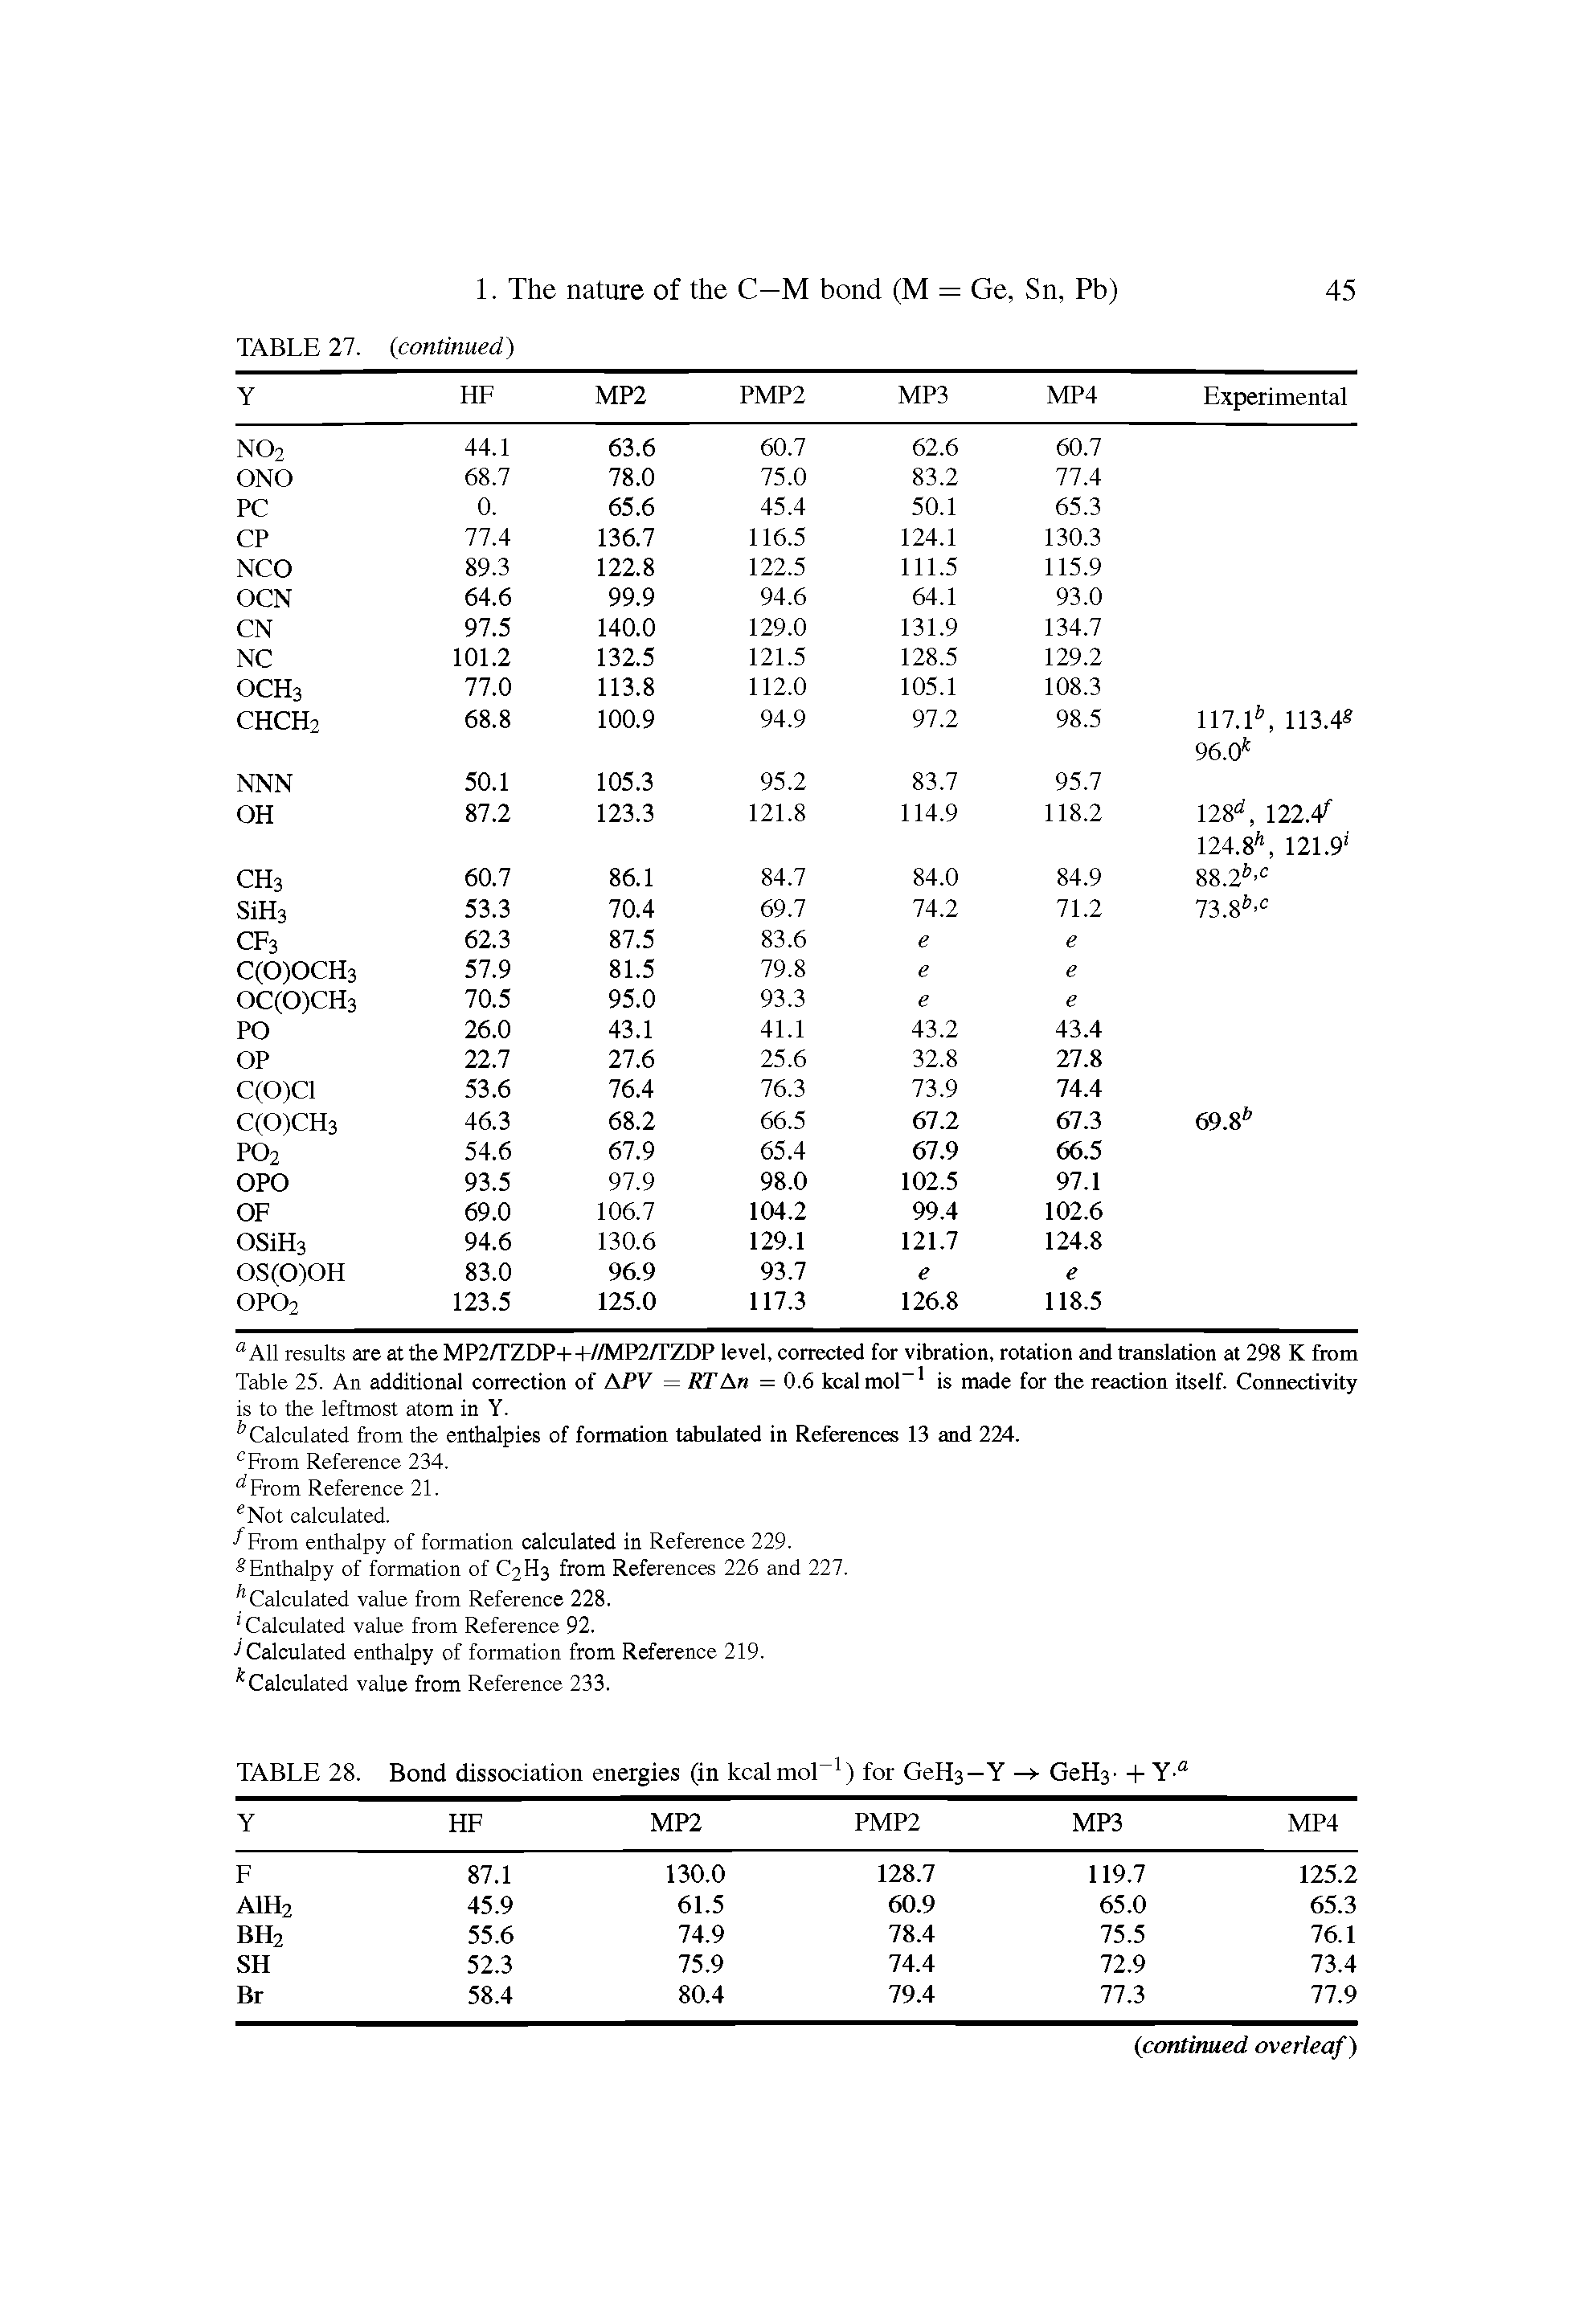 Table 25. An additional correction of APV = RTAn = 0.6 kcal mol-1 is made for die reaction itself. Connectivity is to the leftmost atom in Y. Calculated from the enthalpies of formation tabulated in References 13 and 224. cFrom Reference 234. From Reference 21. eNot calculated. f From enthalpy of formation calculated in Reference 229. Enthalpy of formation of C2H3 from References 226 and 227. Calculated value from Reference 228. 1 Calculated value from Reference 92. Calculated enthalpy of formation from Reference 219. Calculated value from Reference 233. ...